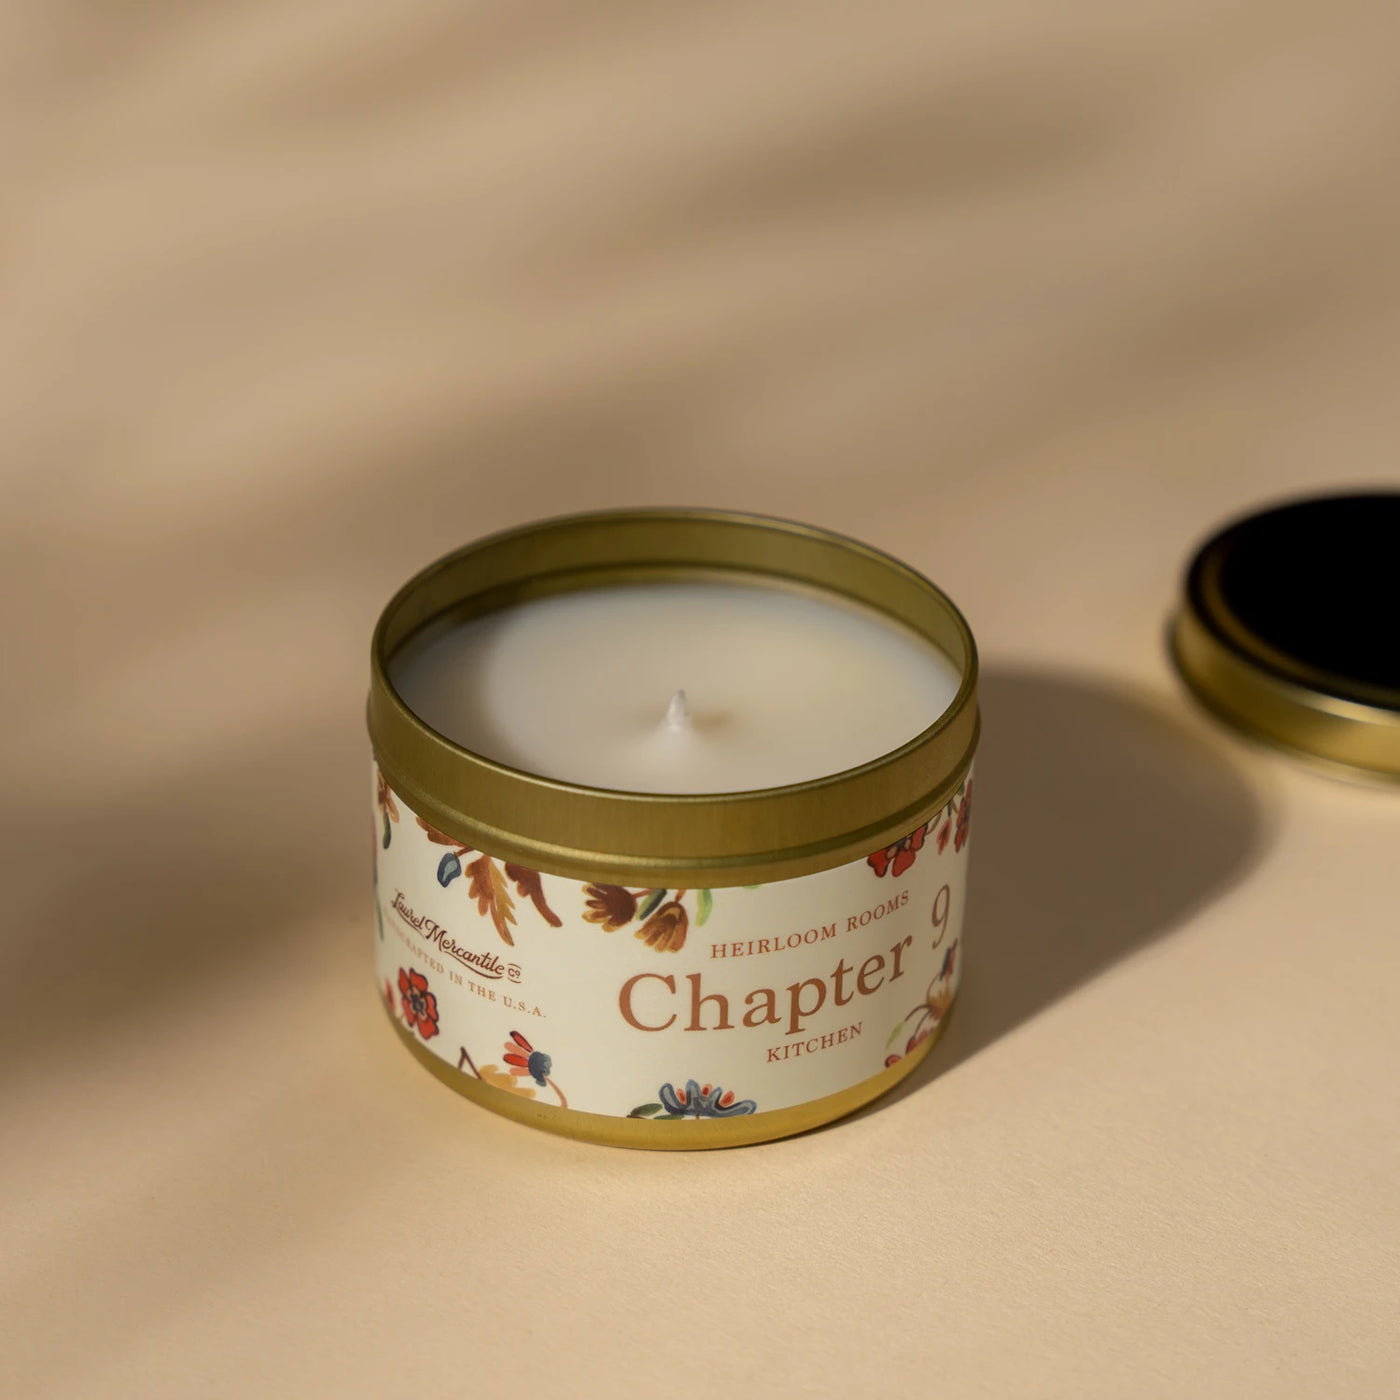 Chapter 9 - Kitchen 5 oz. Candle